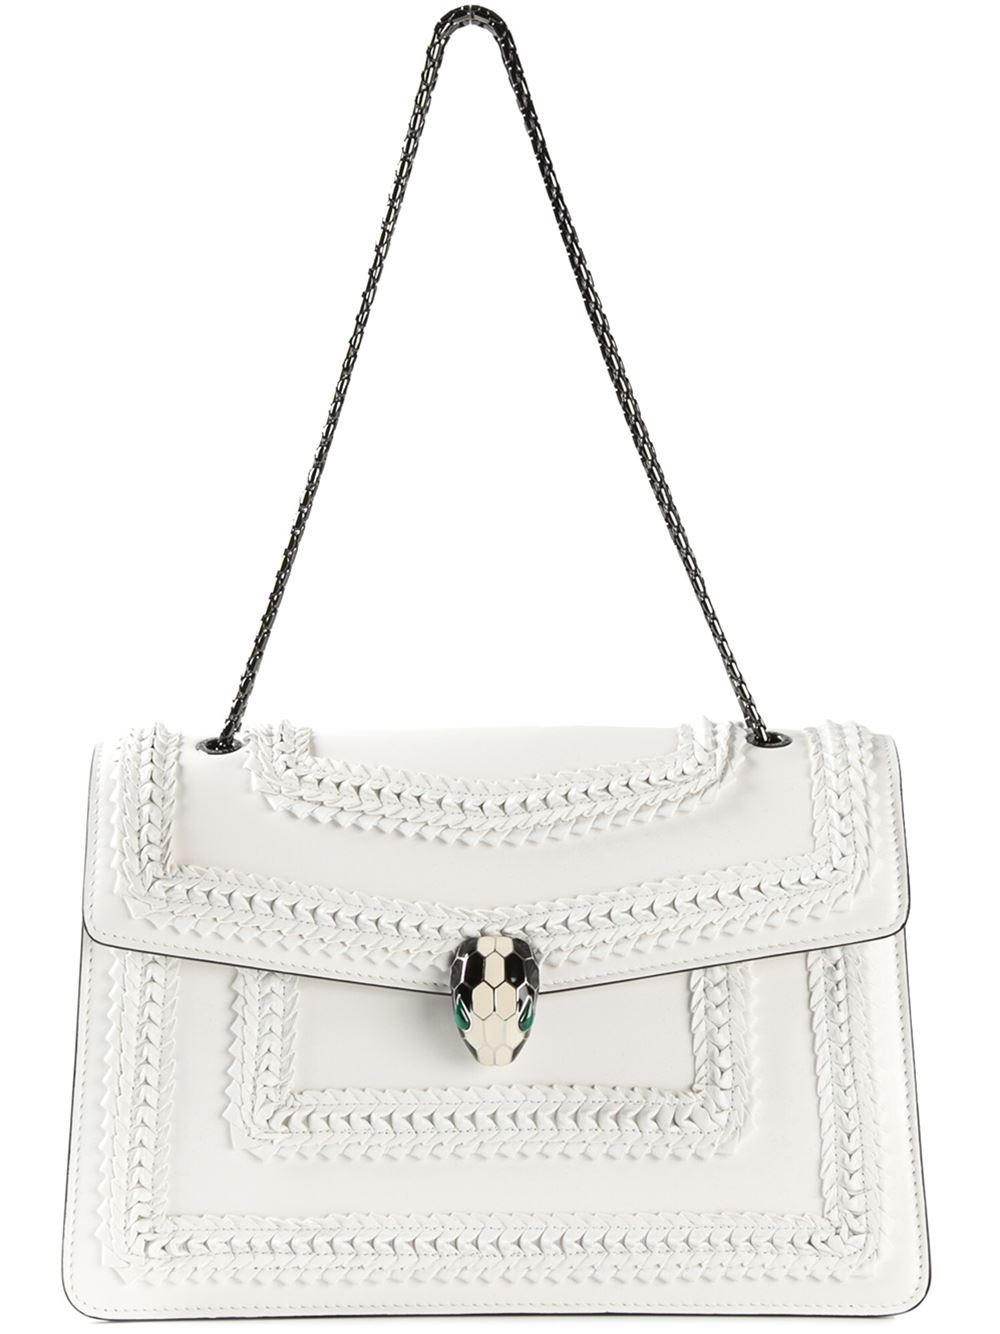 Bvlgari Serpenti Forever Calf-Leather Shoulder Bag in White | Lyst